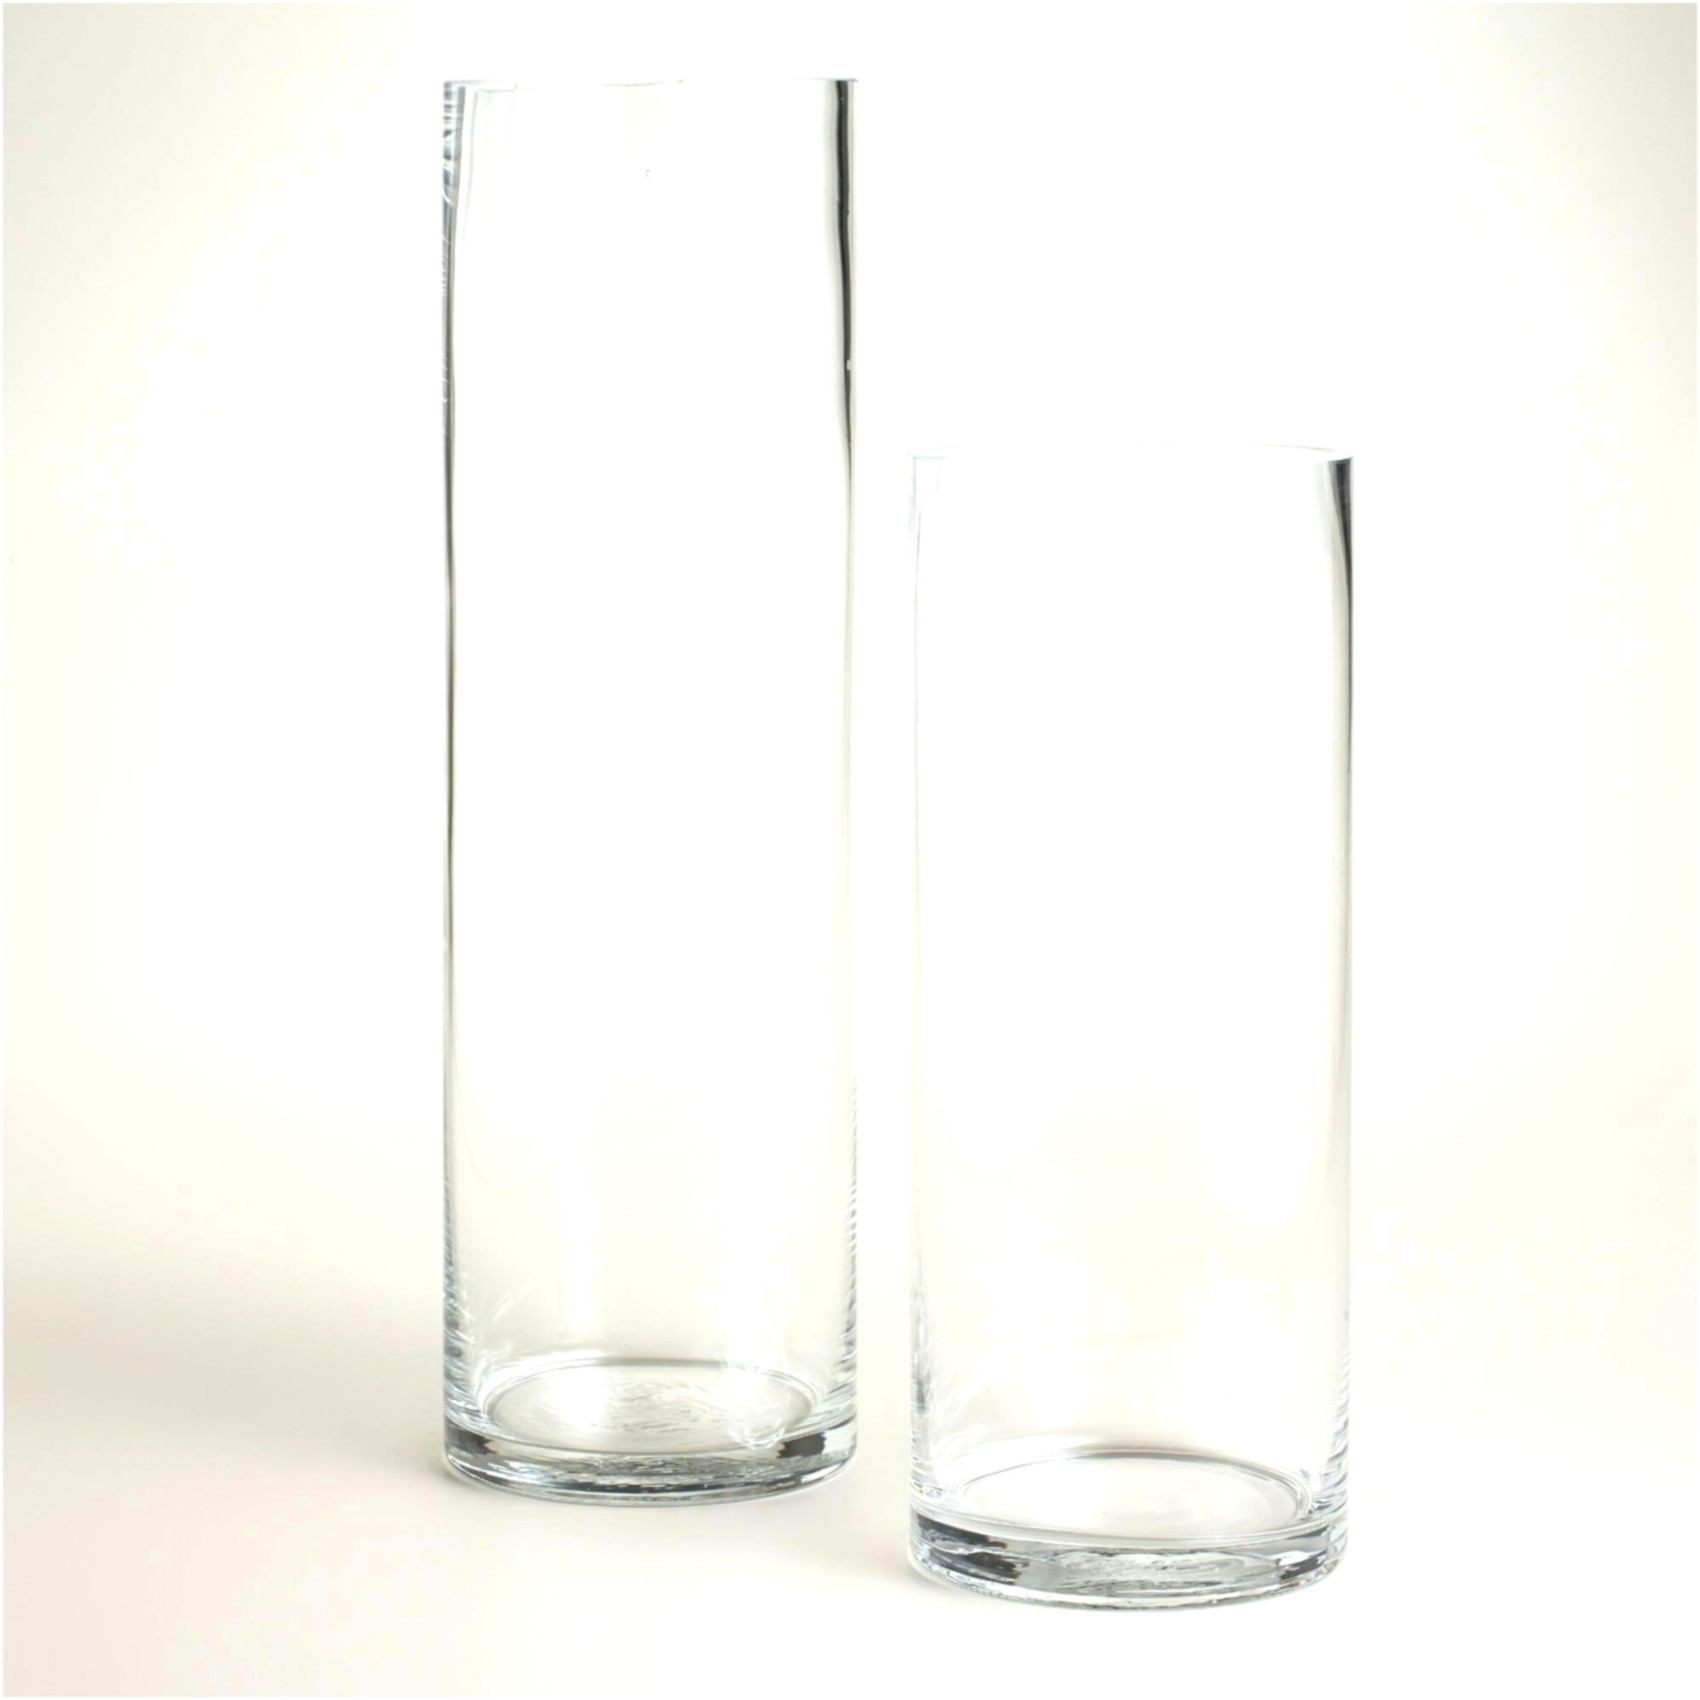 19 Ideal 24 Inch Tall Glass Vases 2024 free download 24 inch tall glass vases of why you should not go to glass vases wholesale glass vases for crystal glass vases wholesale inspirational 30 elegant vases with